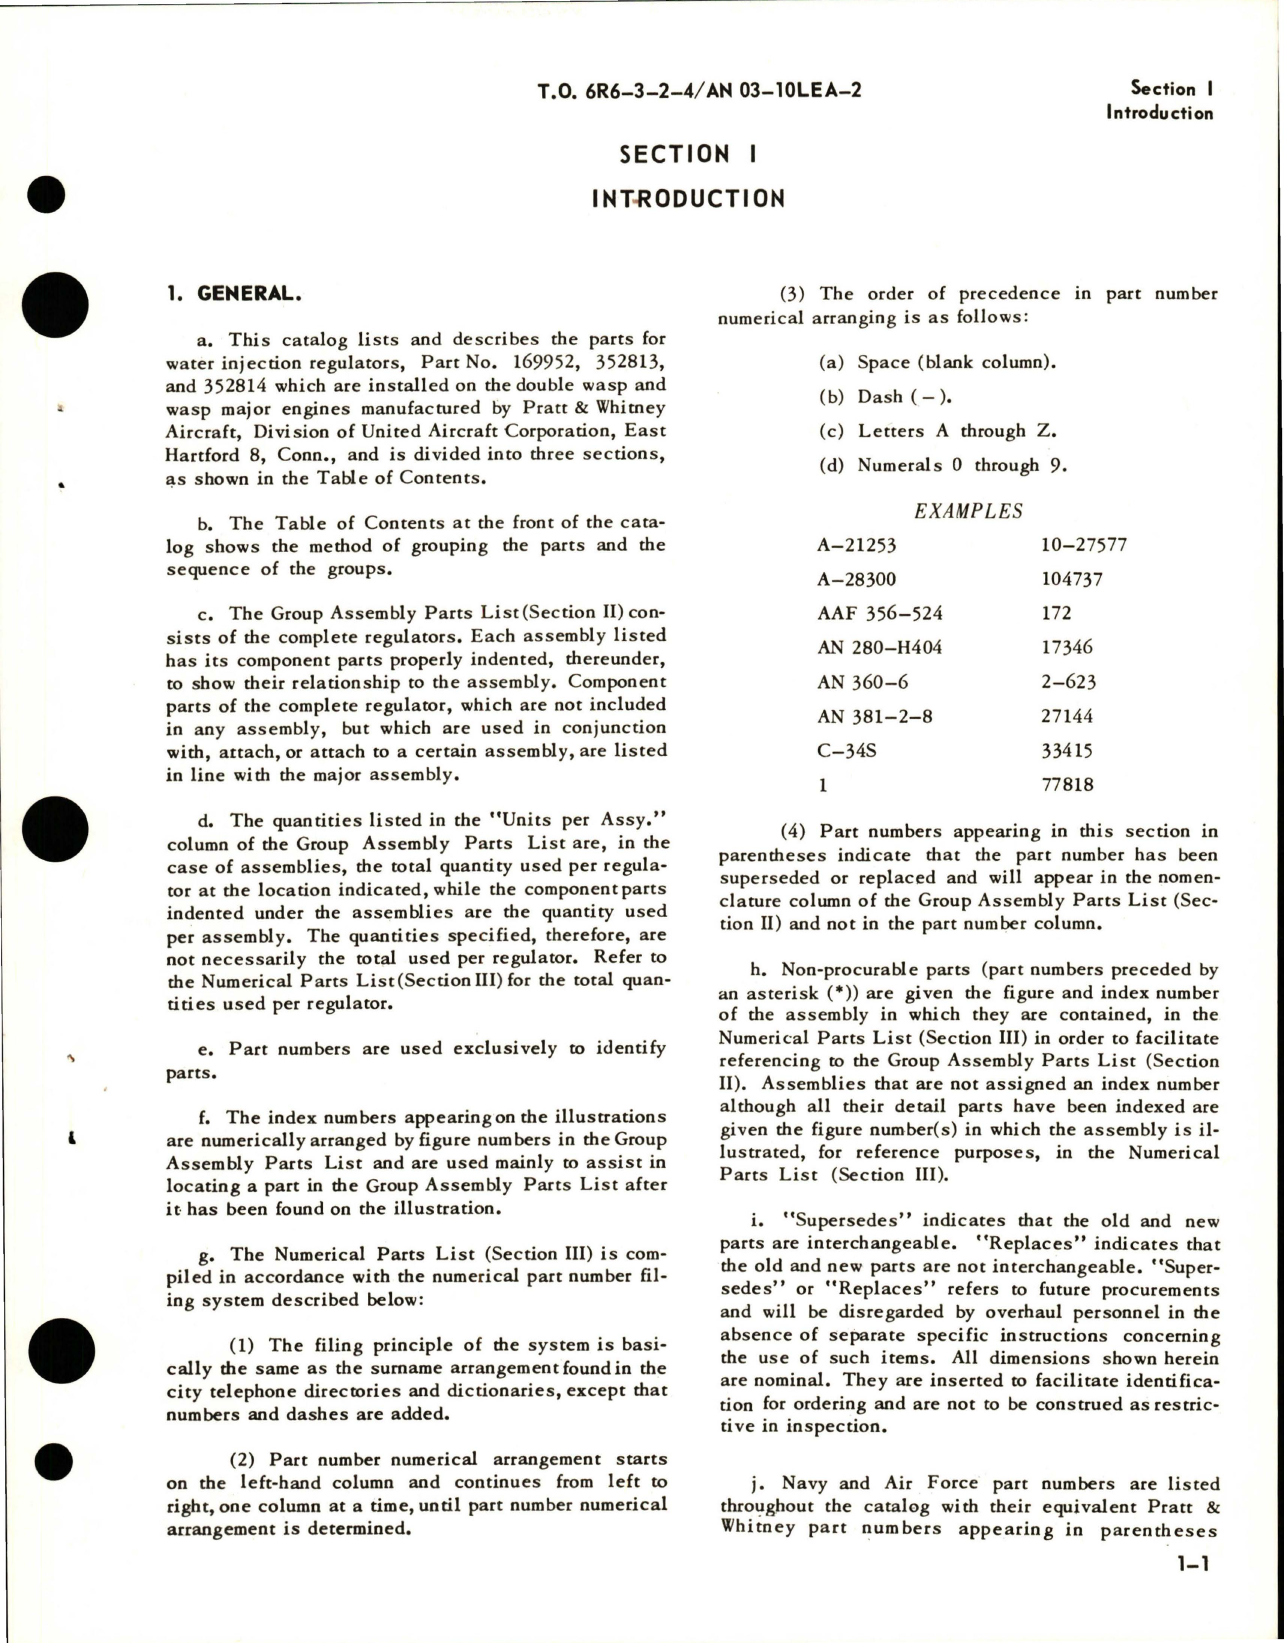 Sample page 5 from AirCorps Library document: Parts Catalog for Water Injection Regulators 